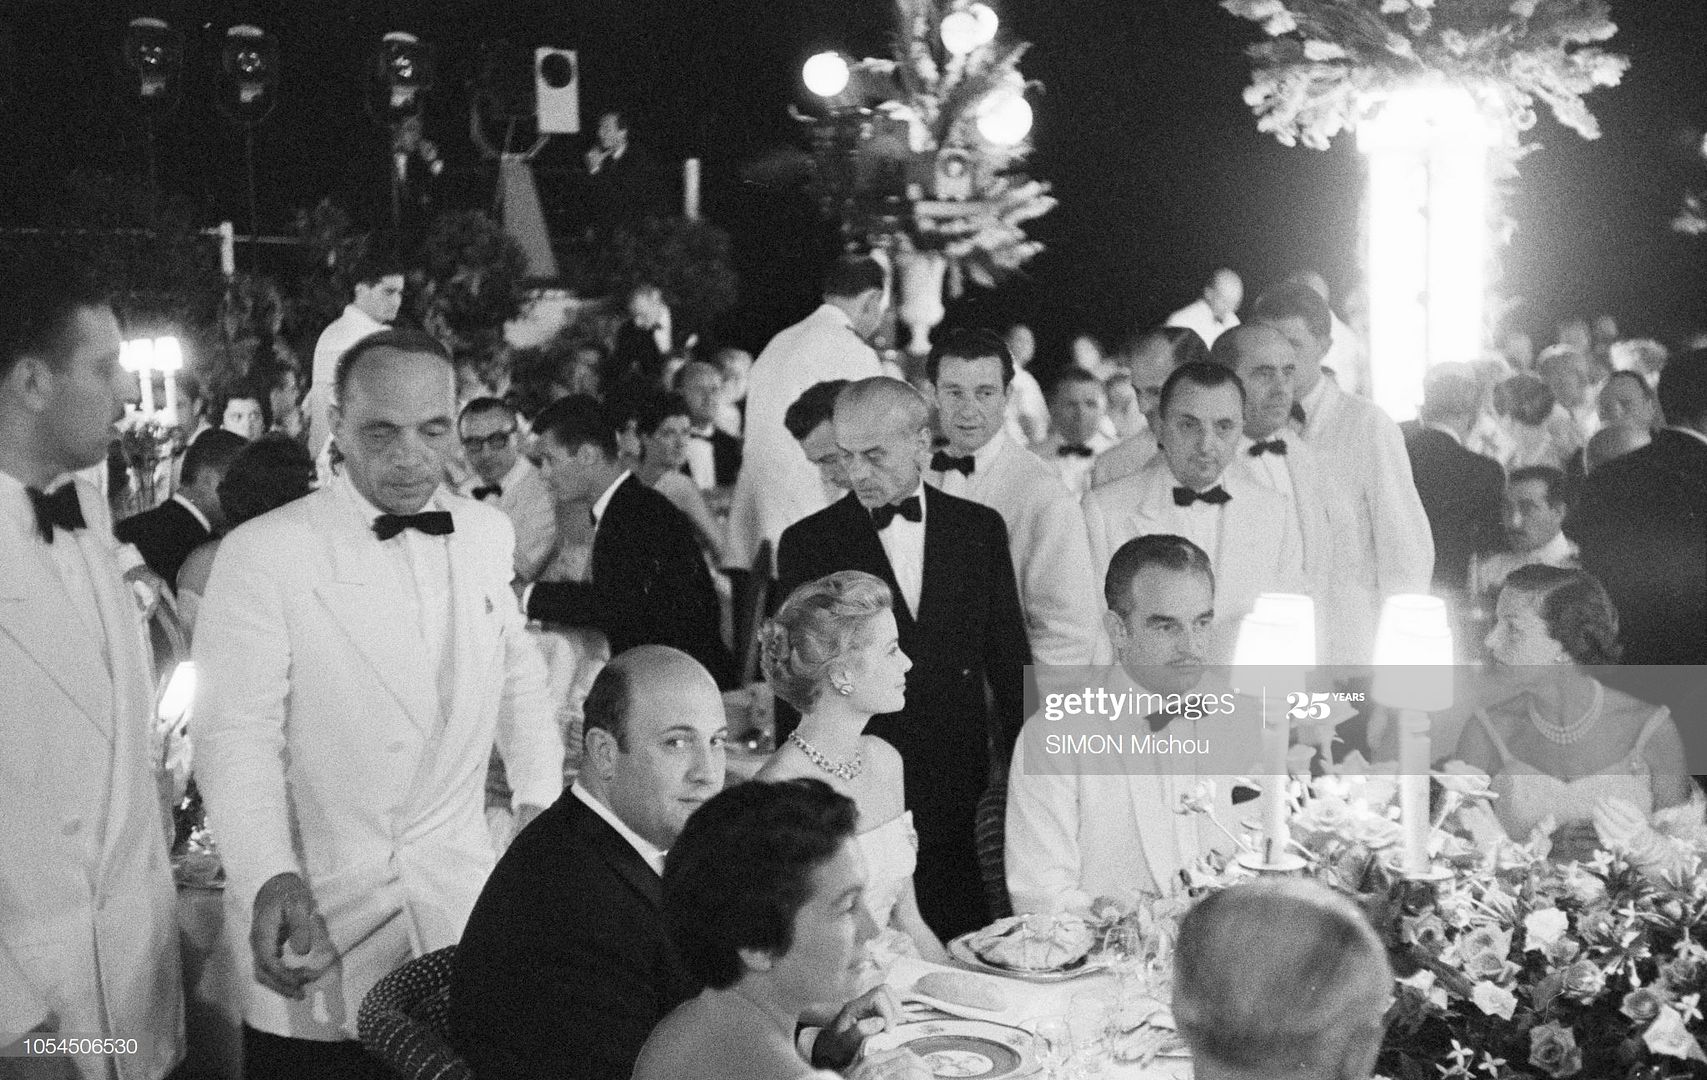 Red Cross ball 1 Aug 1956 gettyimages-1054506530-2048x2048